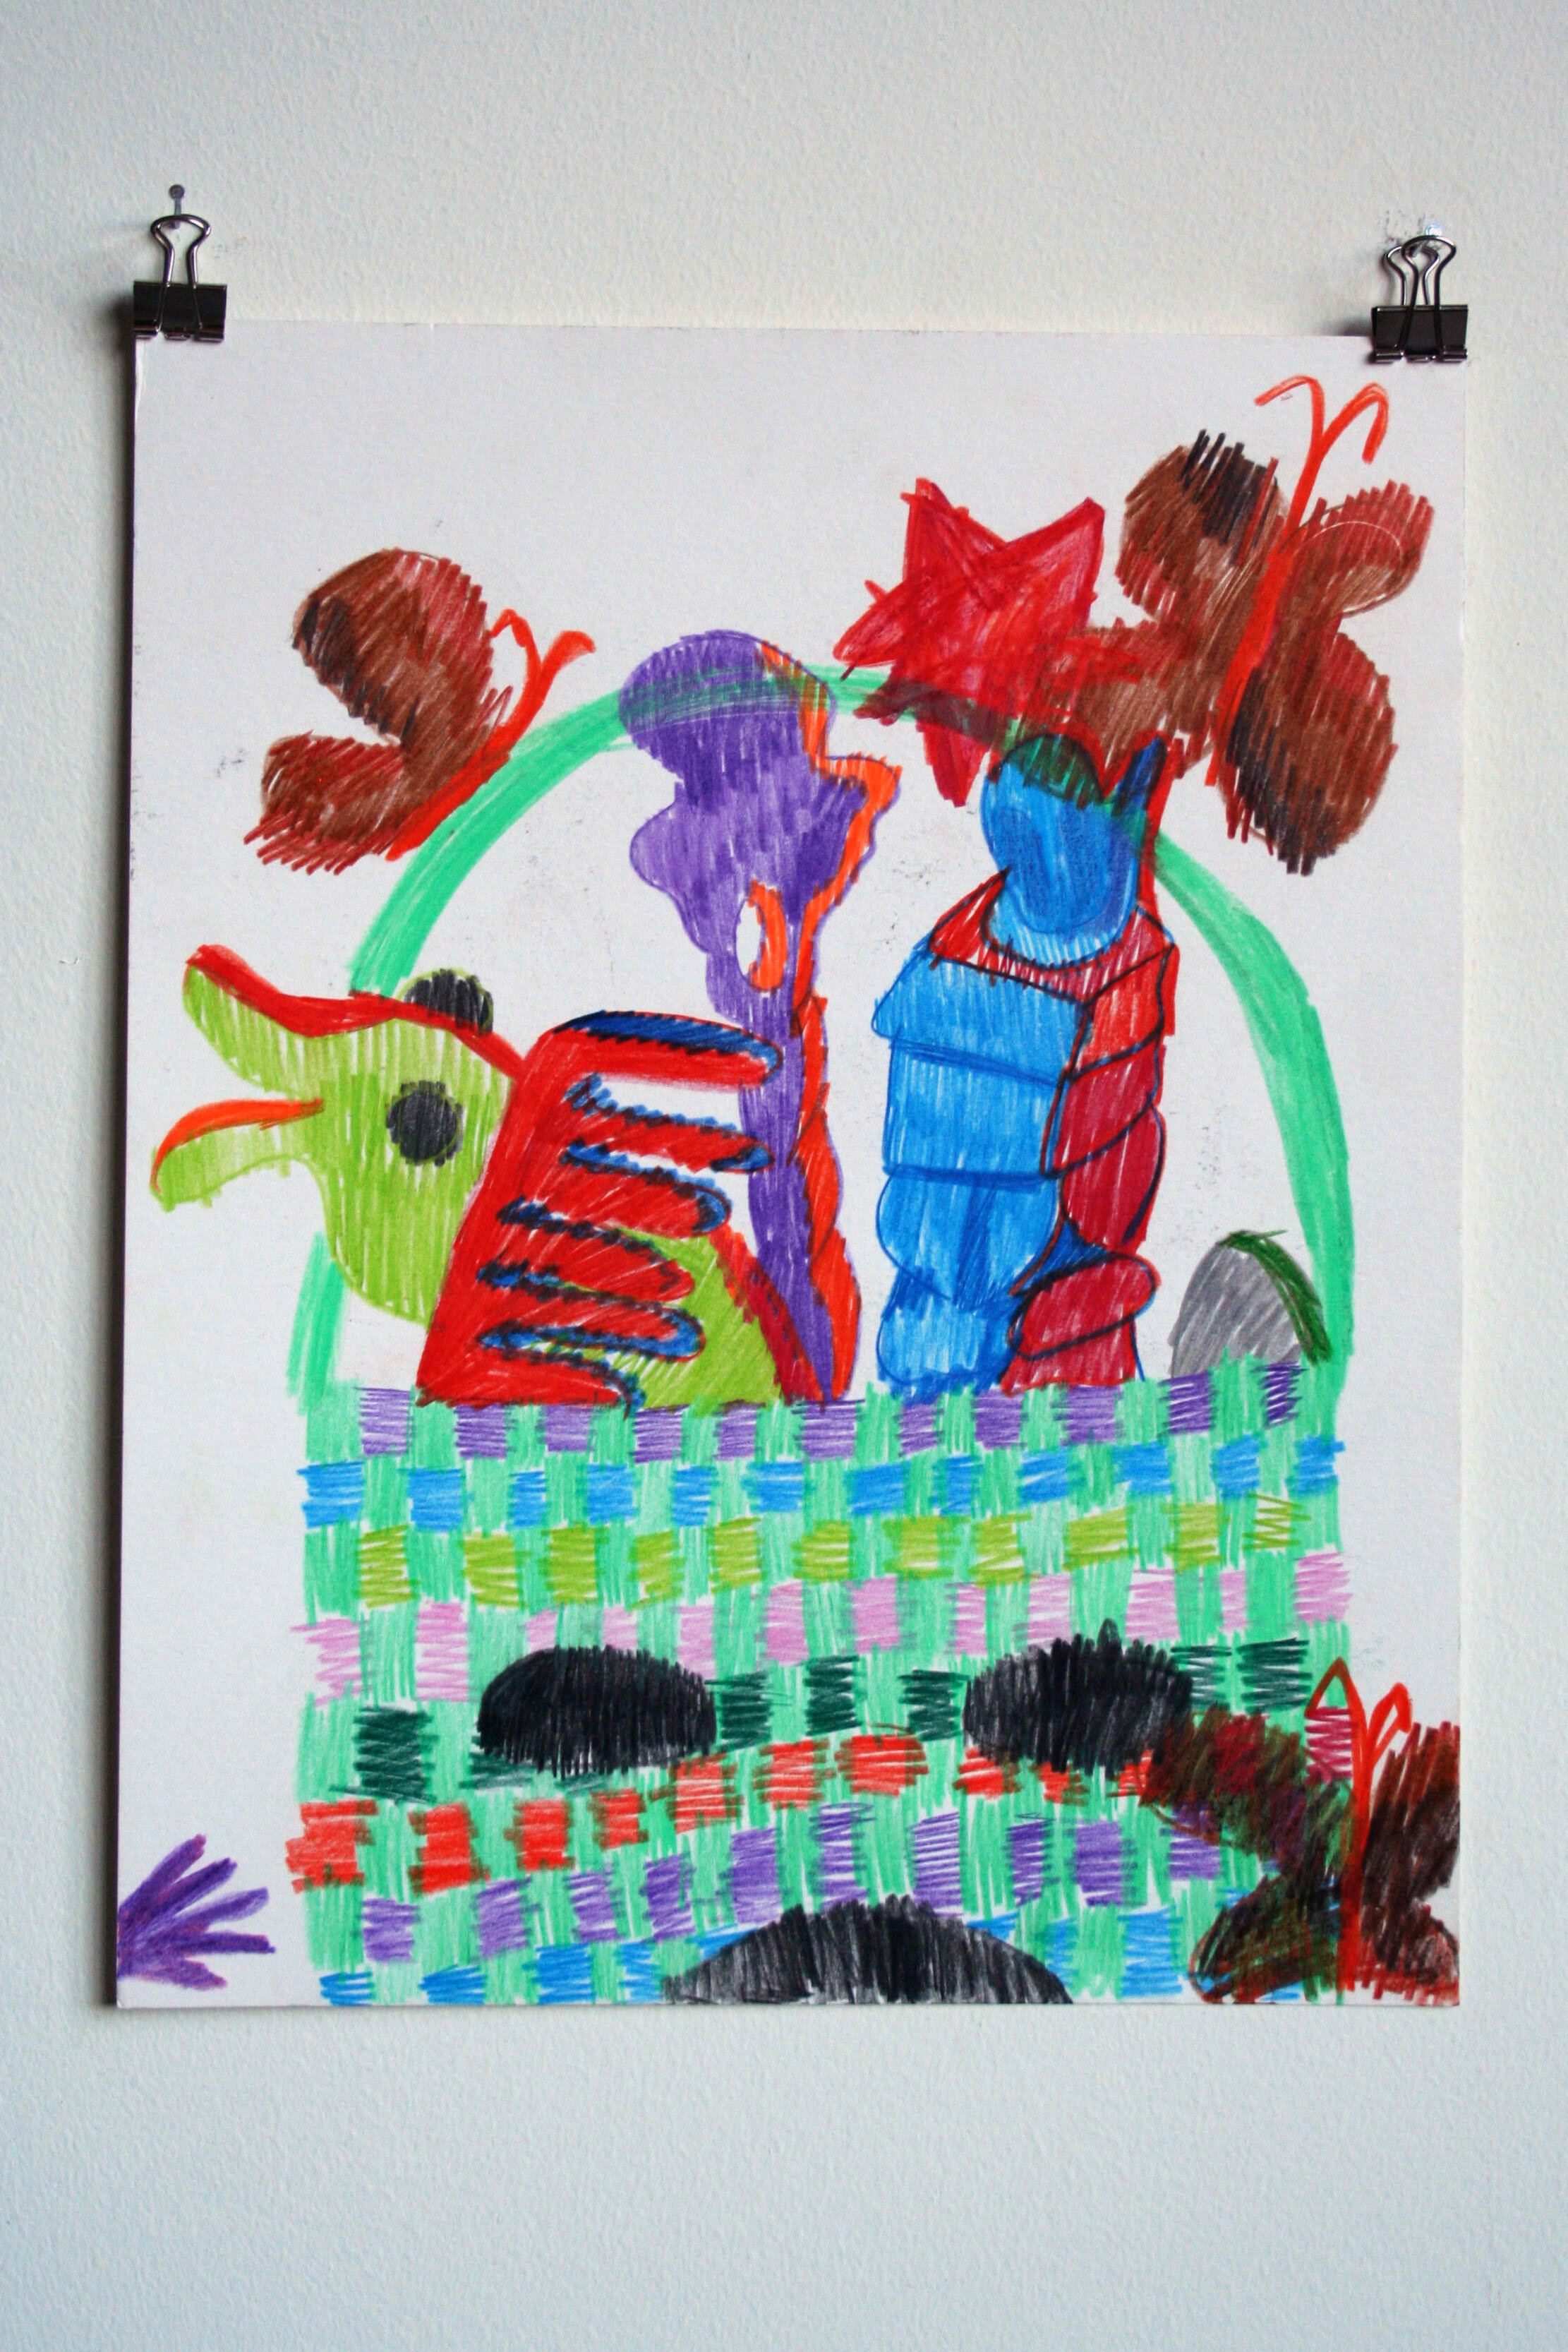   Basket Mask Full of Sculptures,  2013  14 x 11 inches (35.56 x 27.94 cm.)  colored pencil on paper 